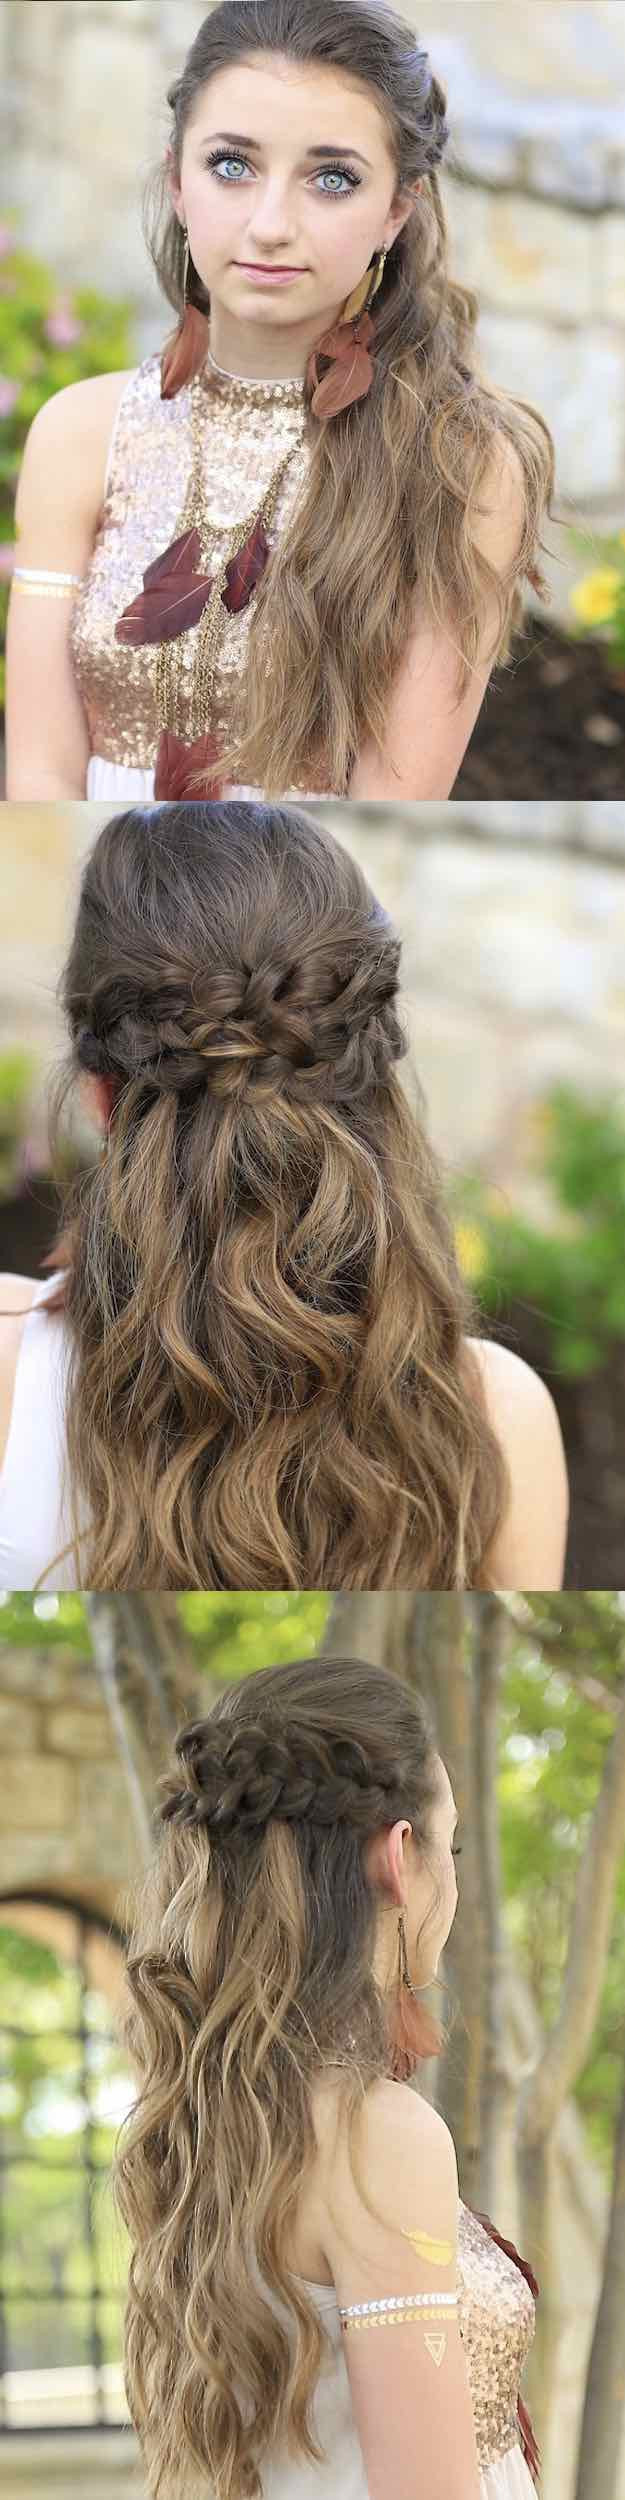 Hairstyles For Prom Half Up Half Down
 25 Easy Half Up Half Down Hairstyle Tutorials For Prom